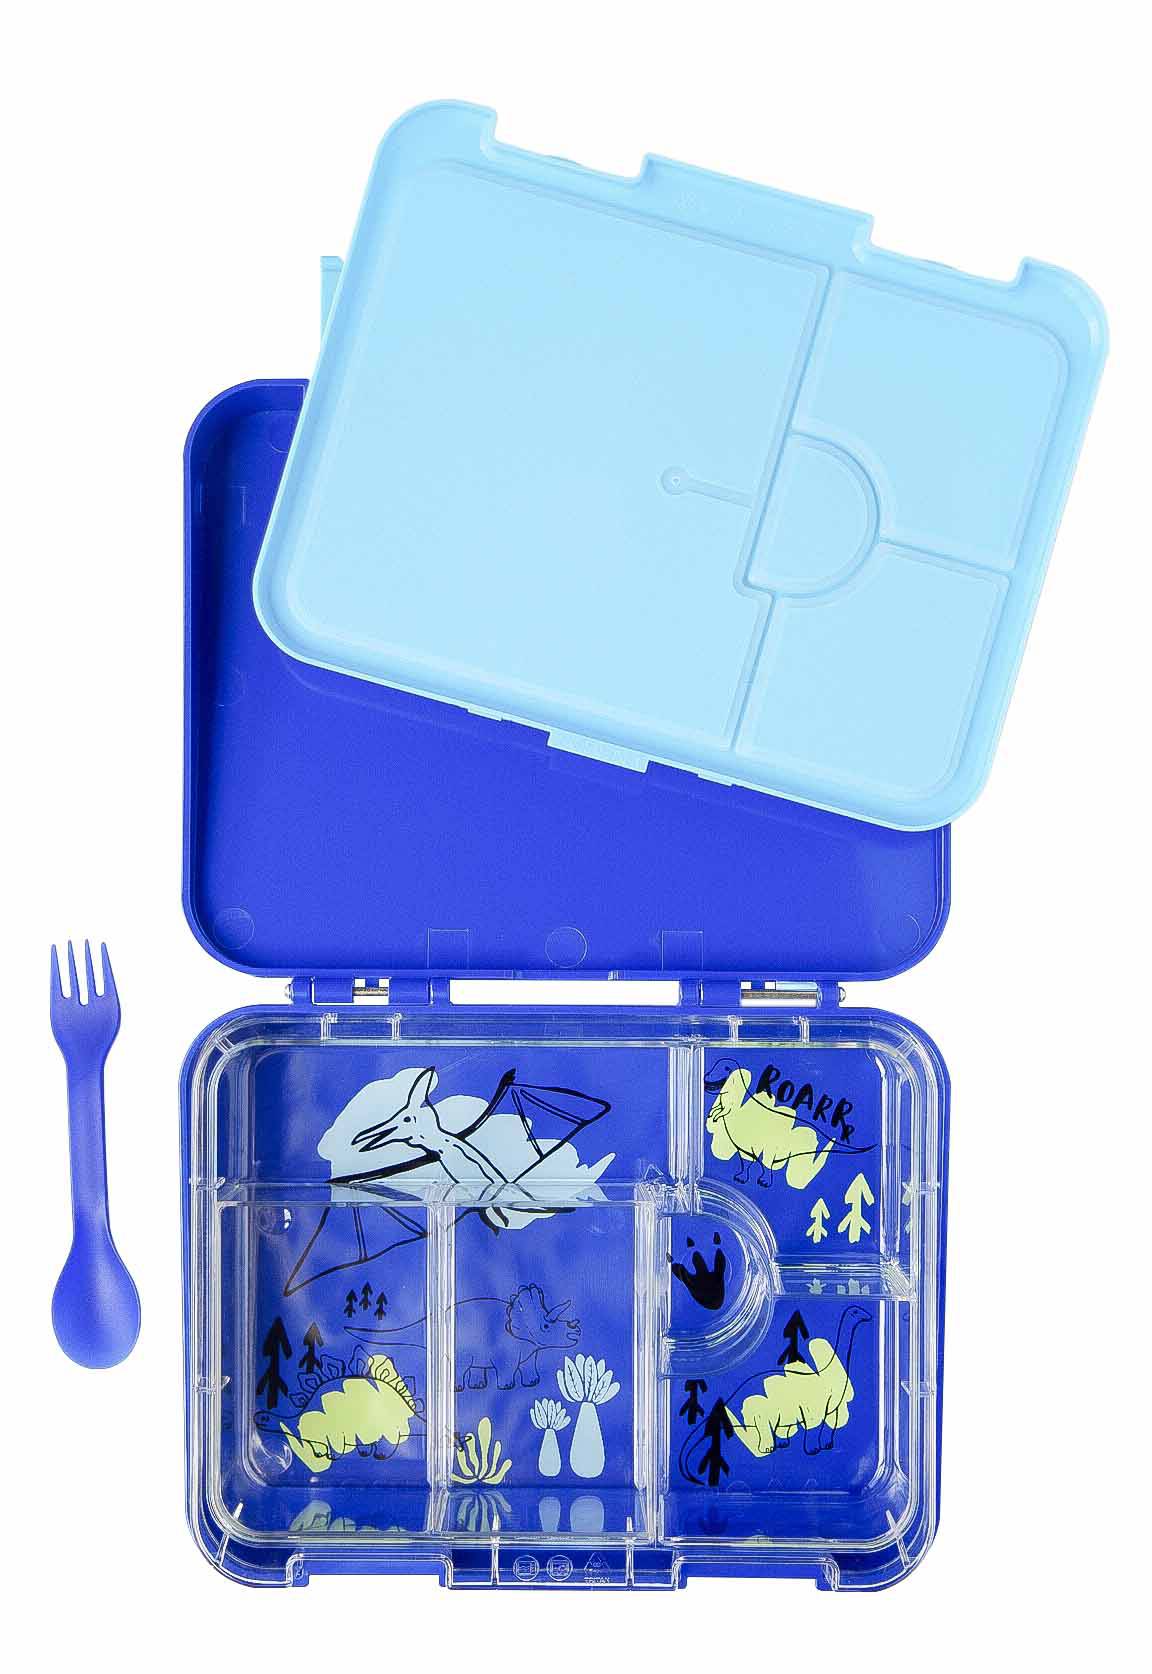 Lunchboxinc  TWO x Lunch Box Leakproof Kiwibox 2.0 Bento  Choose any 2 - LunchBox Inc.